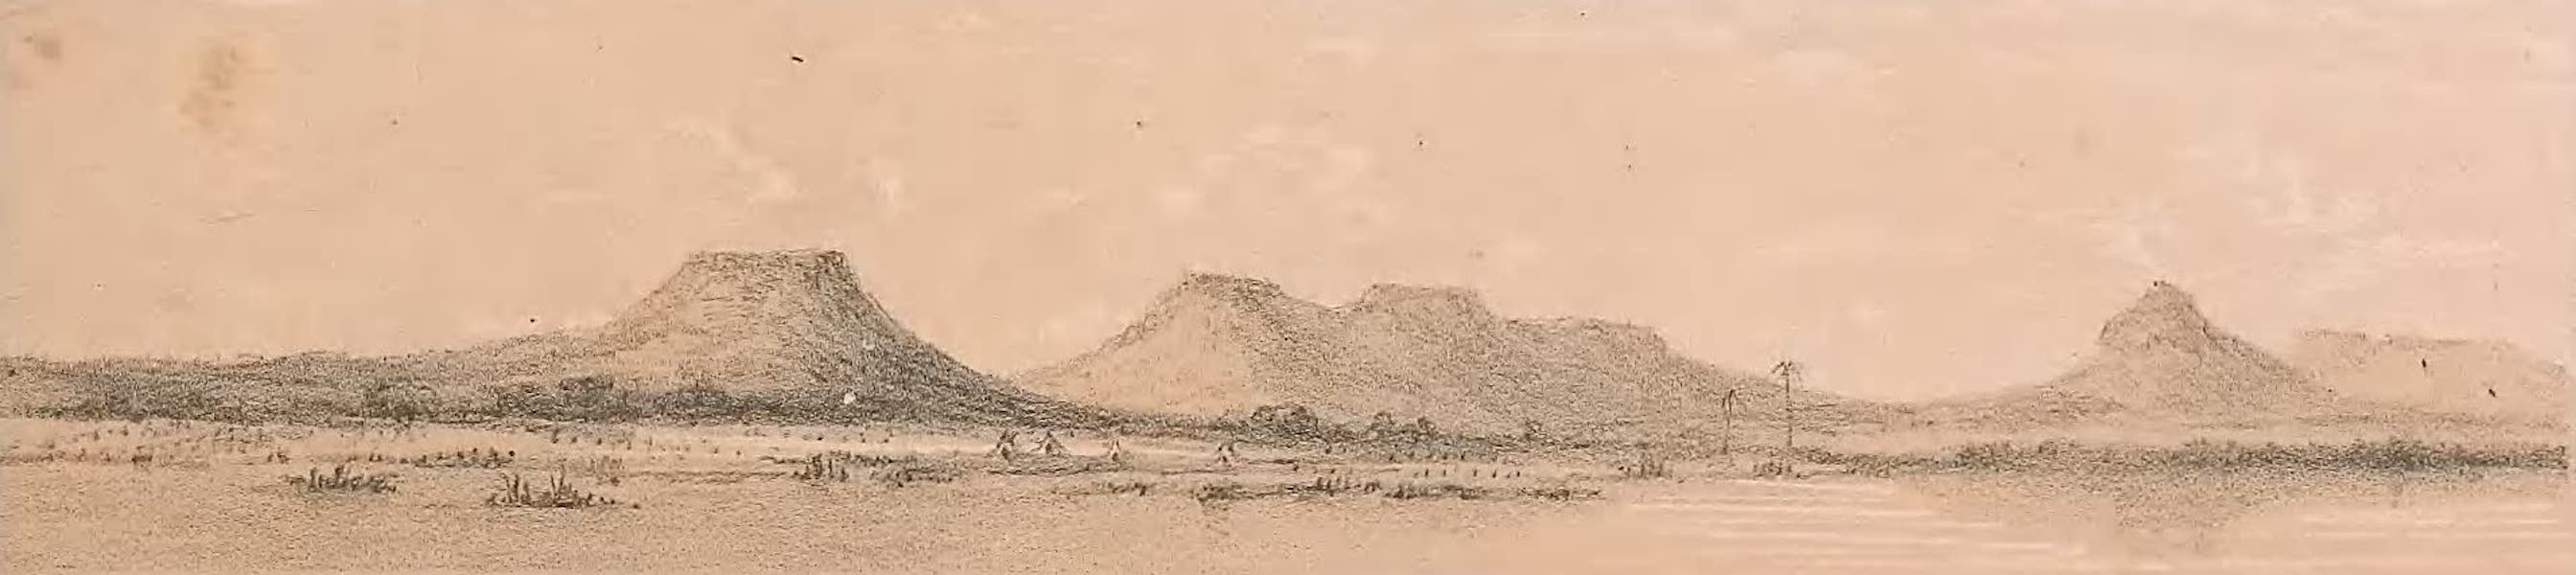 Picturesque Views on the River Niger - The Terry Mountains (1840)